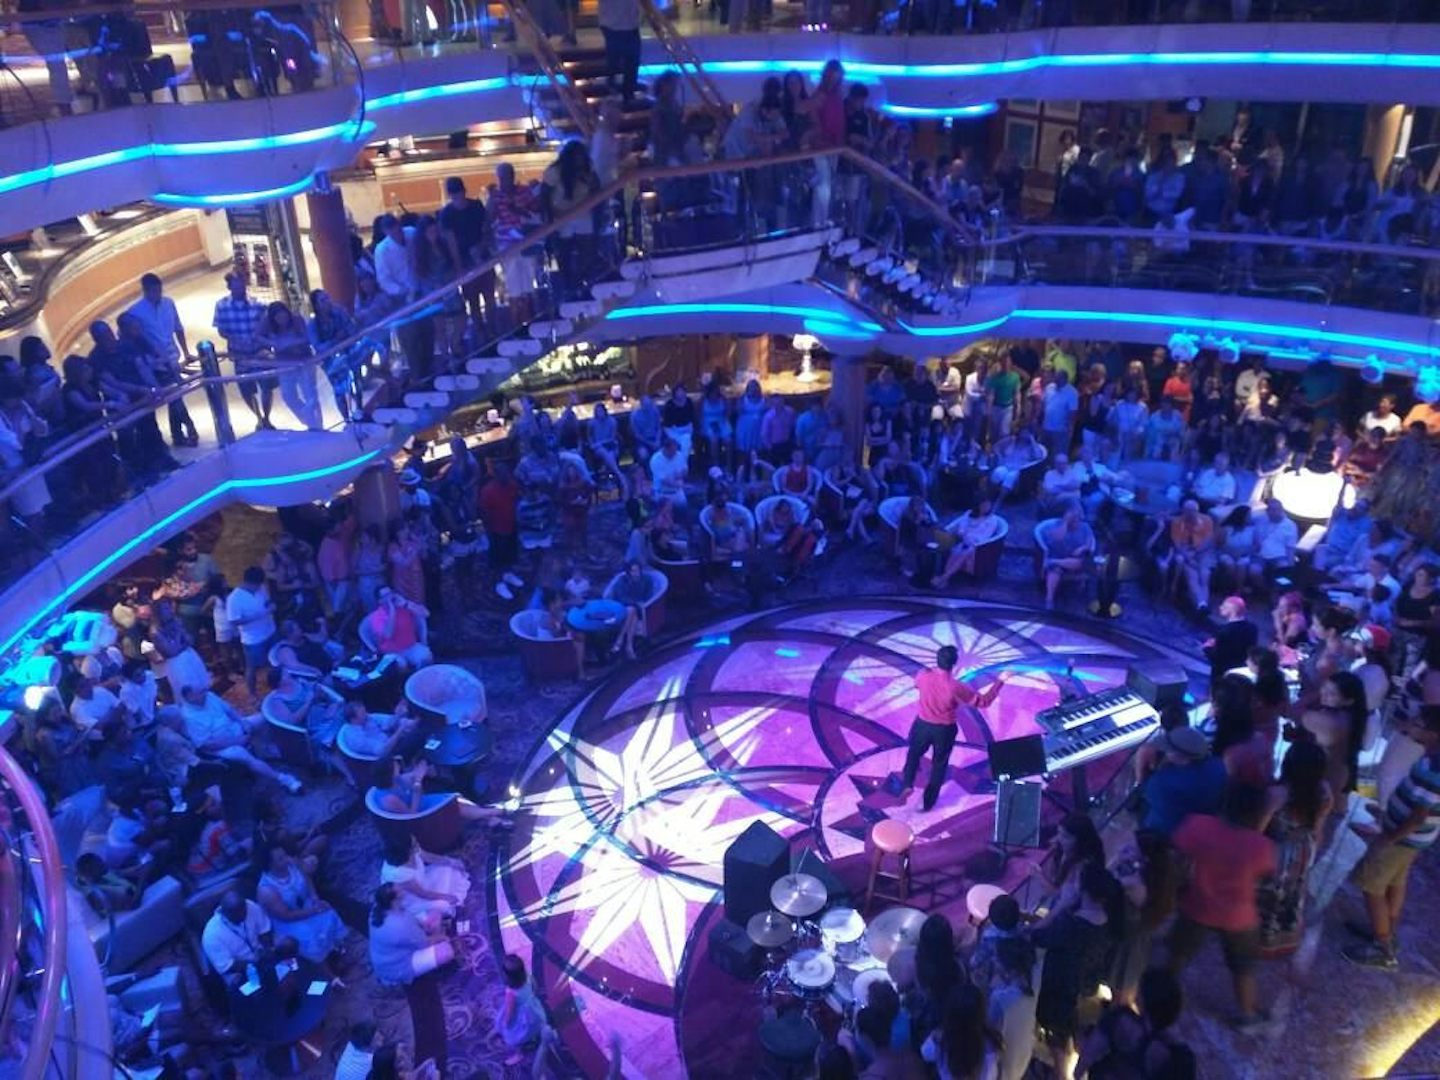 Common Area during a show